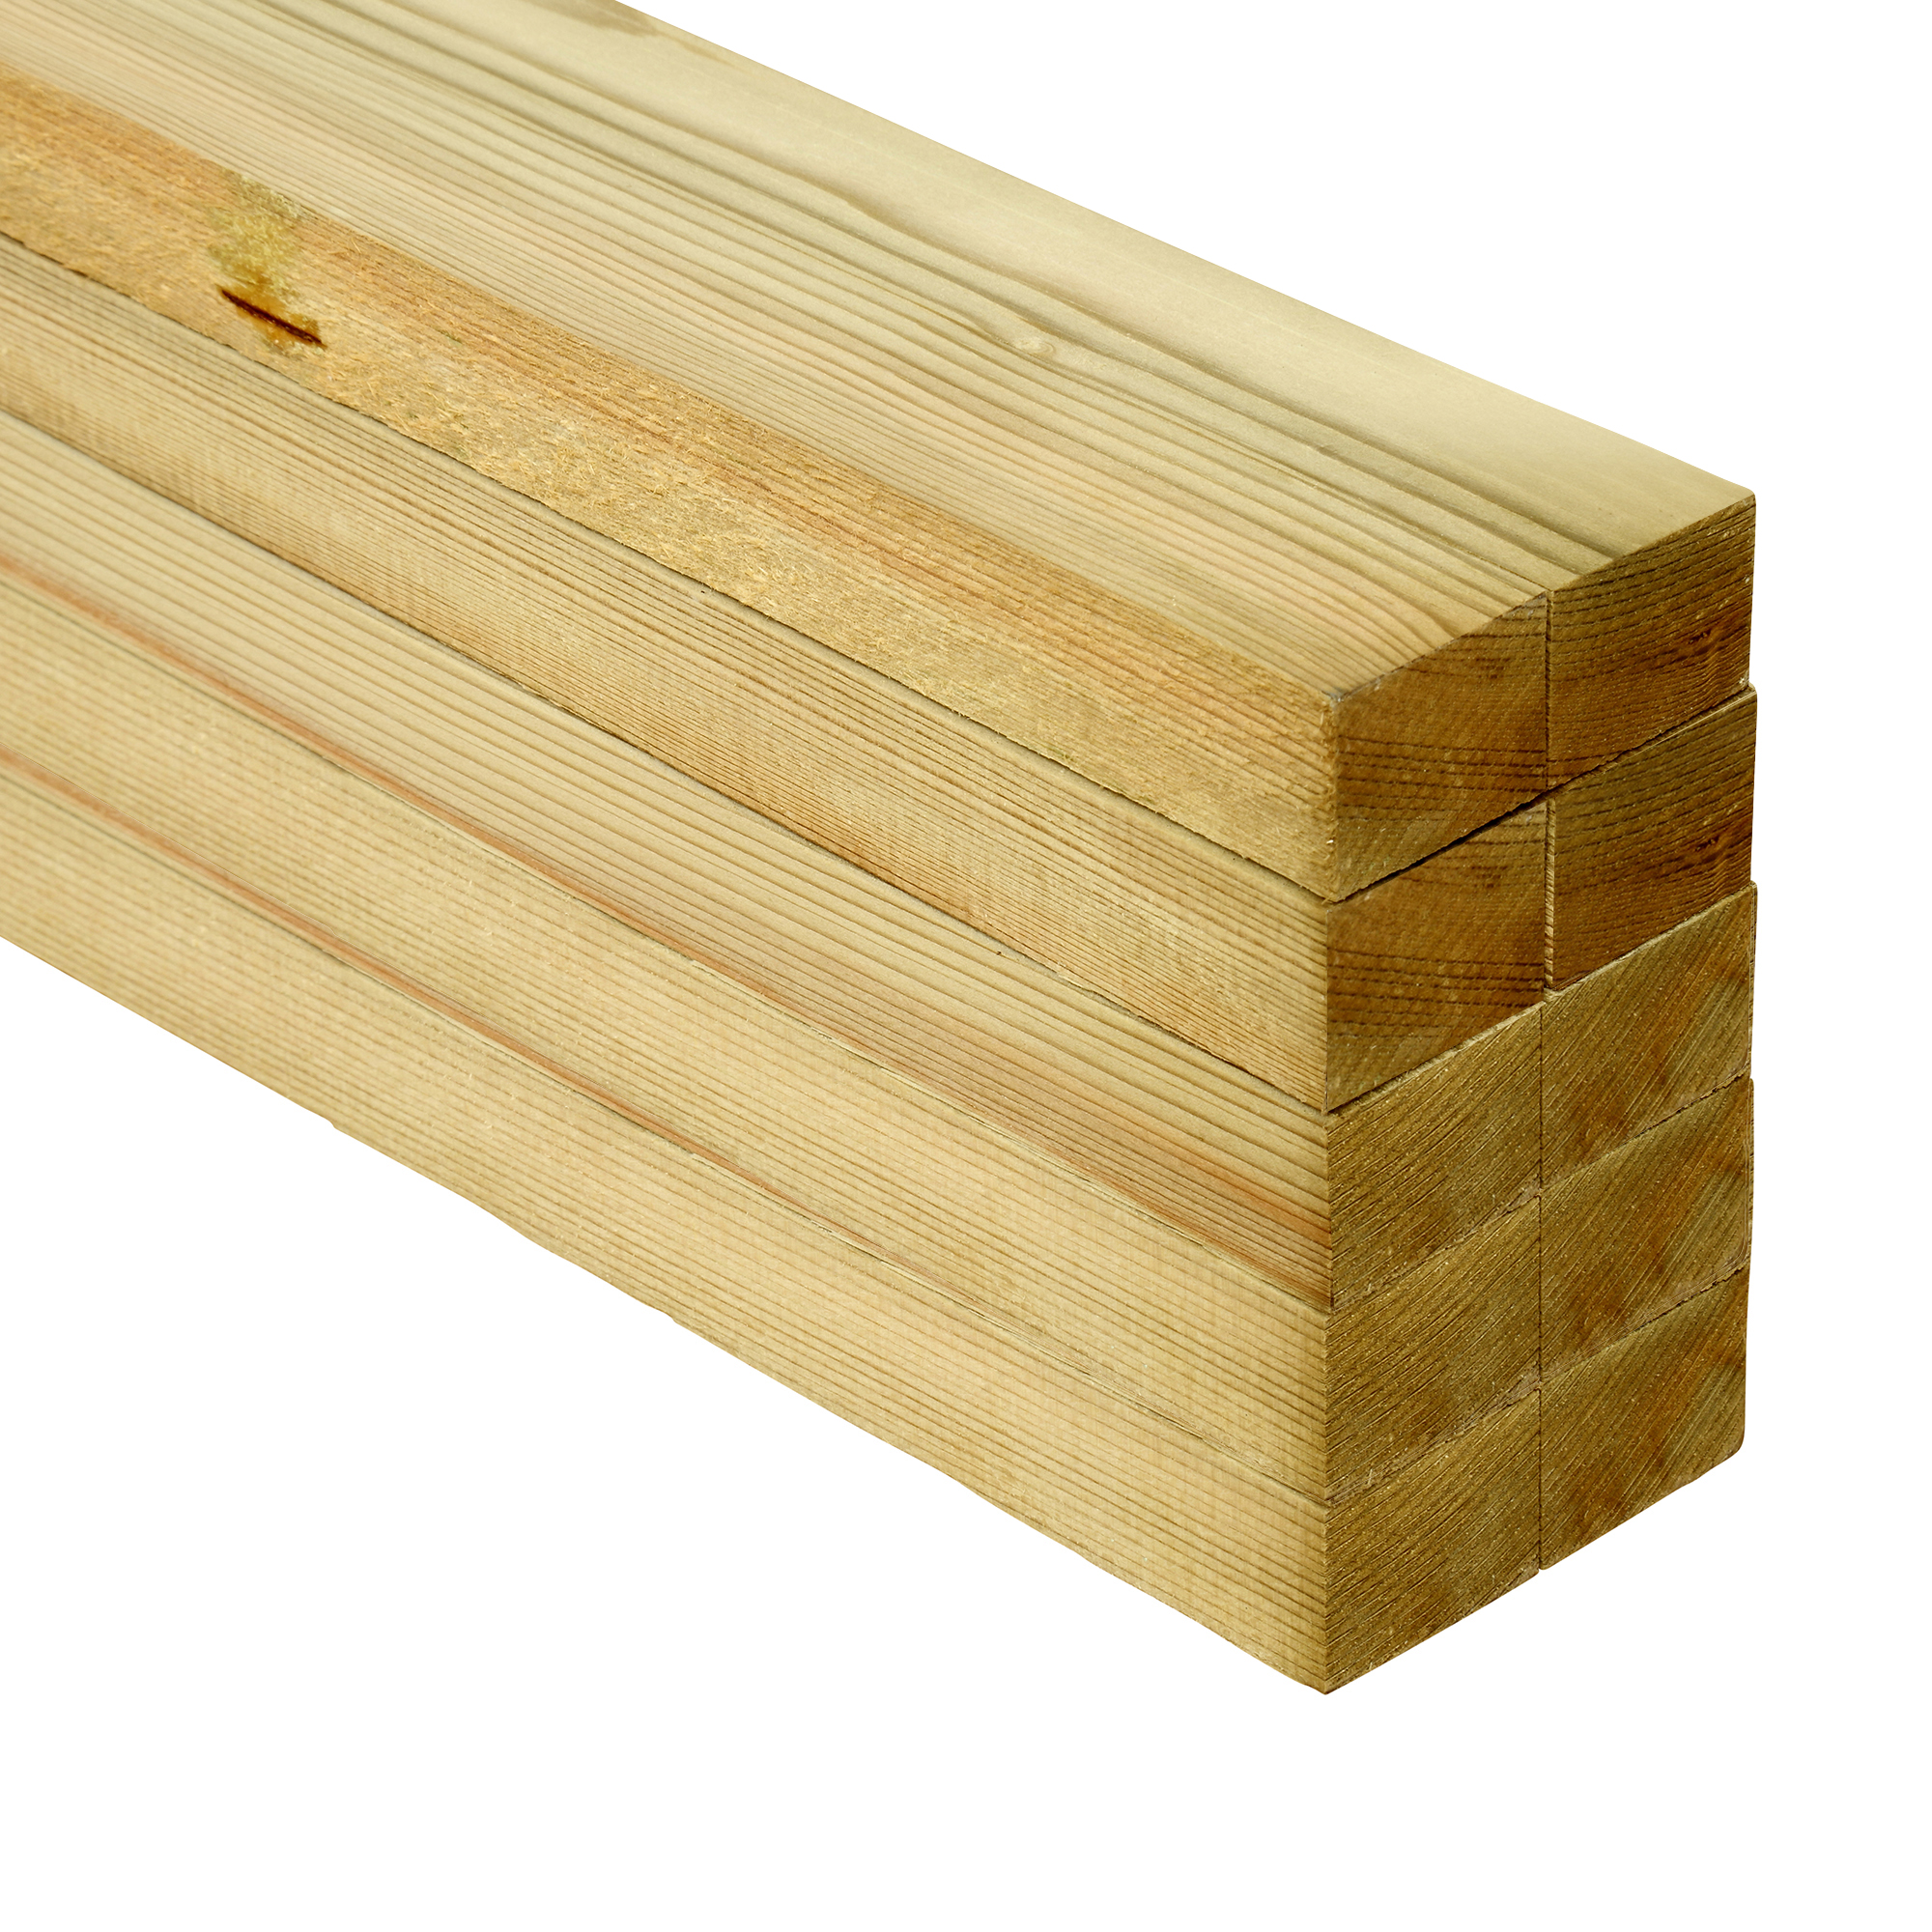 Image of Wickes Treated Sawn Timber - 25 x 38 x 1800mm - Pack of 10